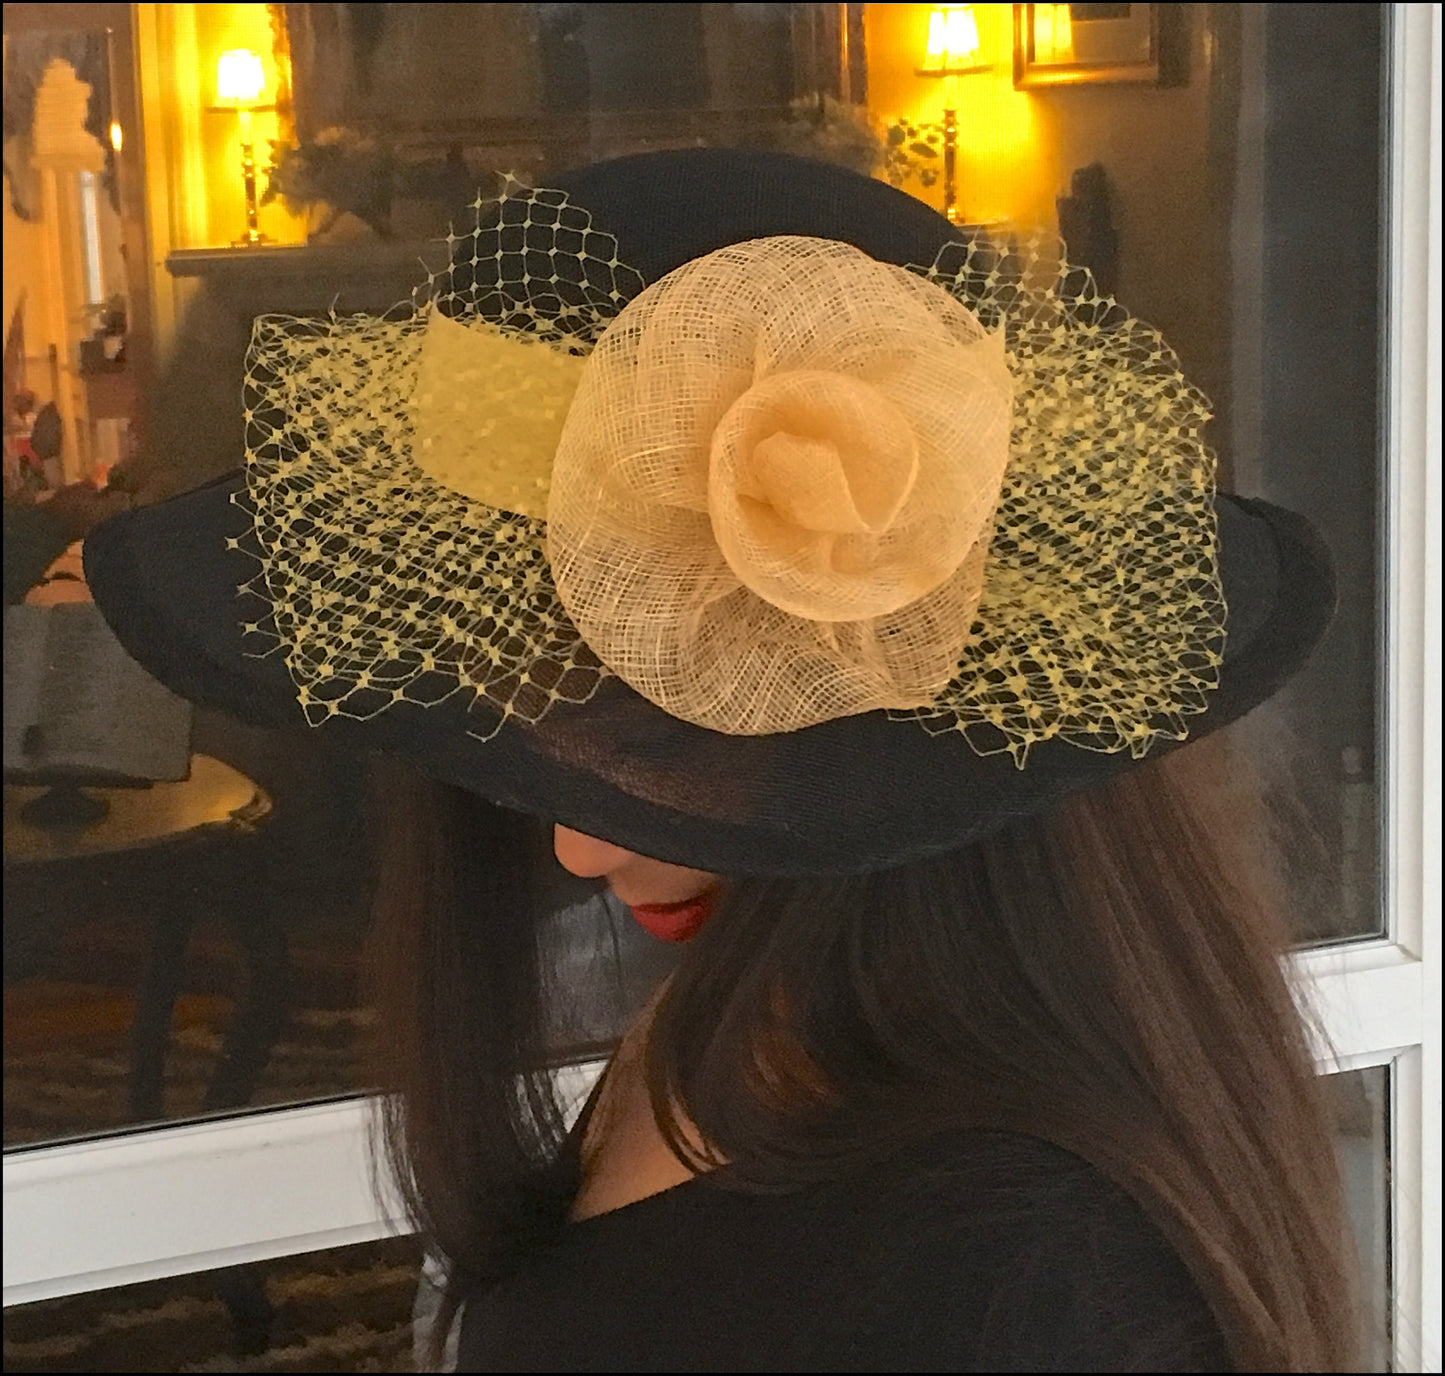 Black Sinamay Hat, Wide Brimmed hat Yellow Trim, Veiling, Black and Yellow hat. Wedding hat, Kentucky Derby, Royal Ascot, Race Track Hat